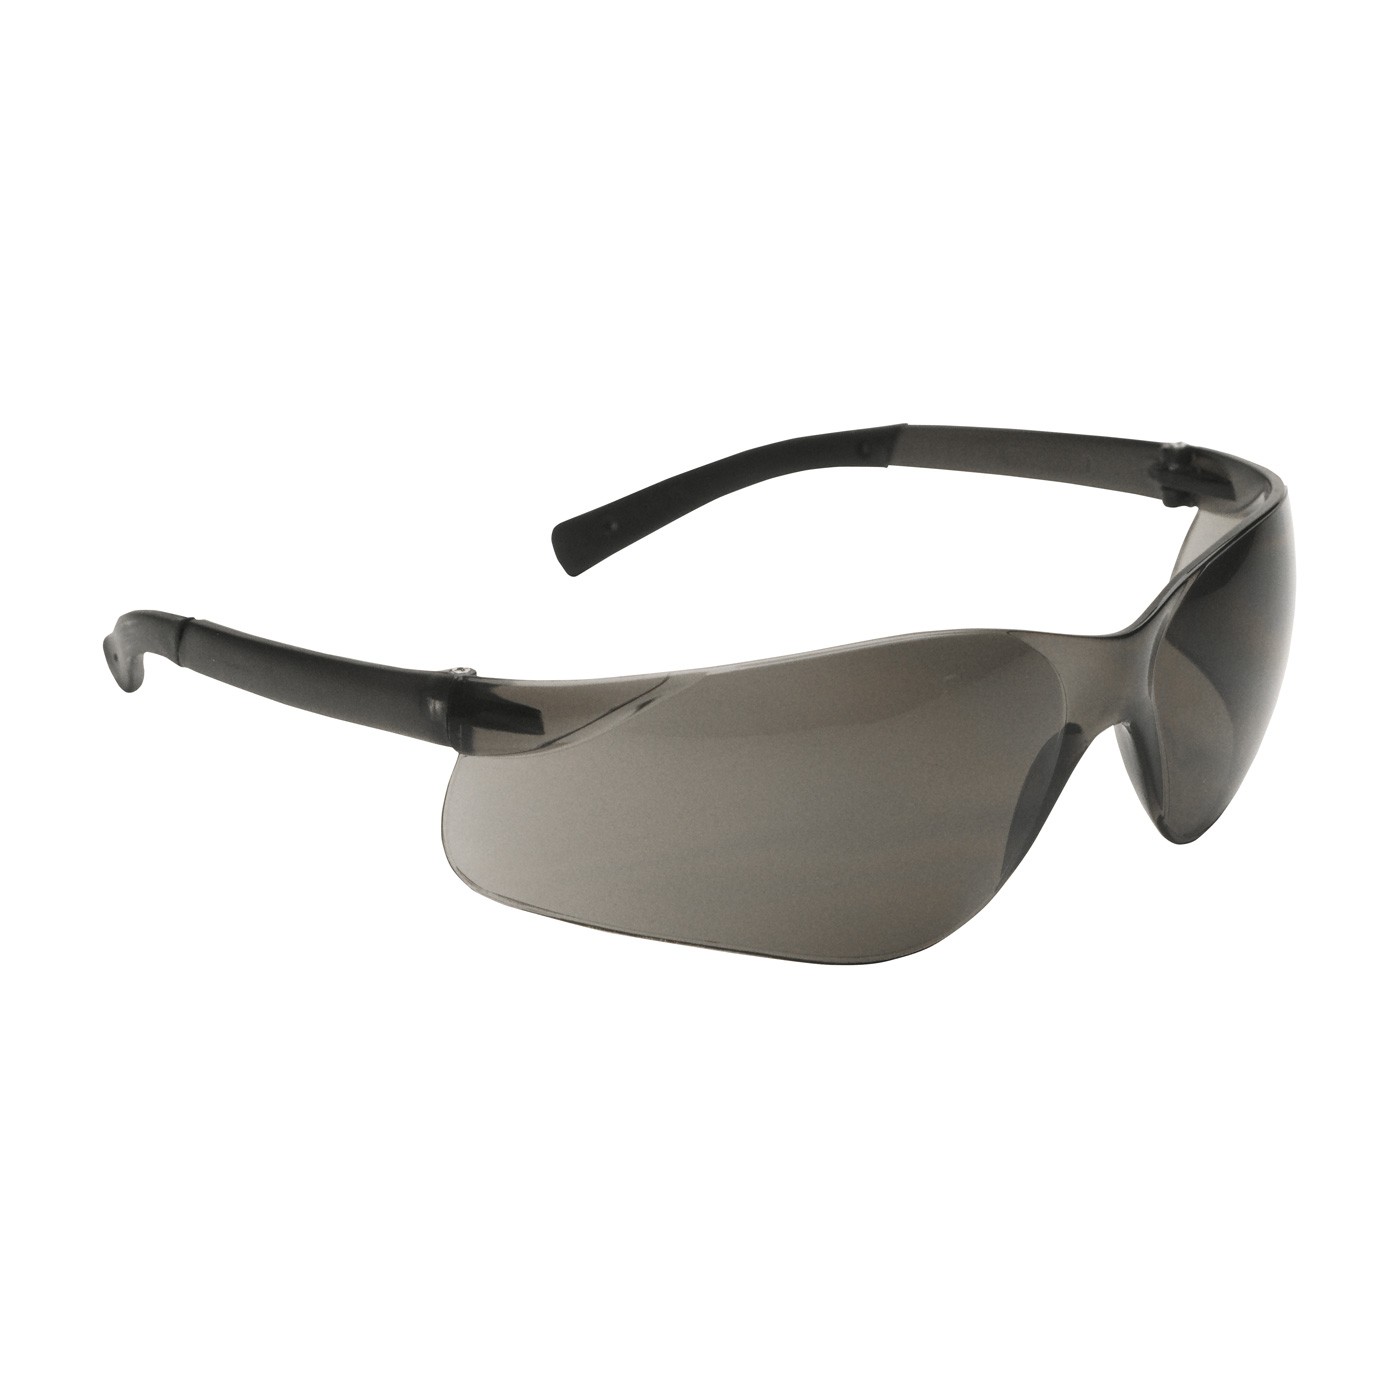 Zenon Z13™ Rimless Safety Glasses with Dark Gray Temple, Gray Lens and Anti-Scratch Coating  (#250-06-5501)